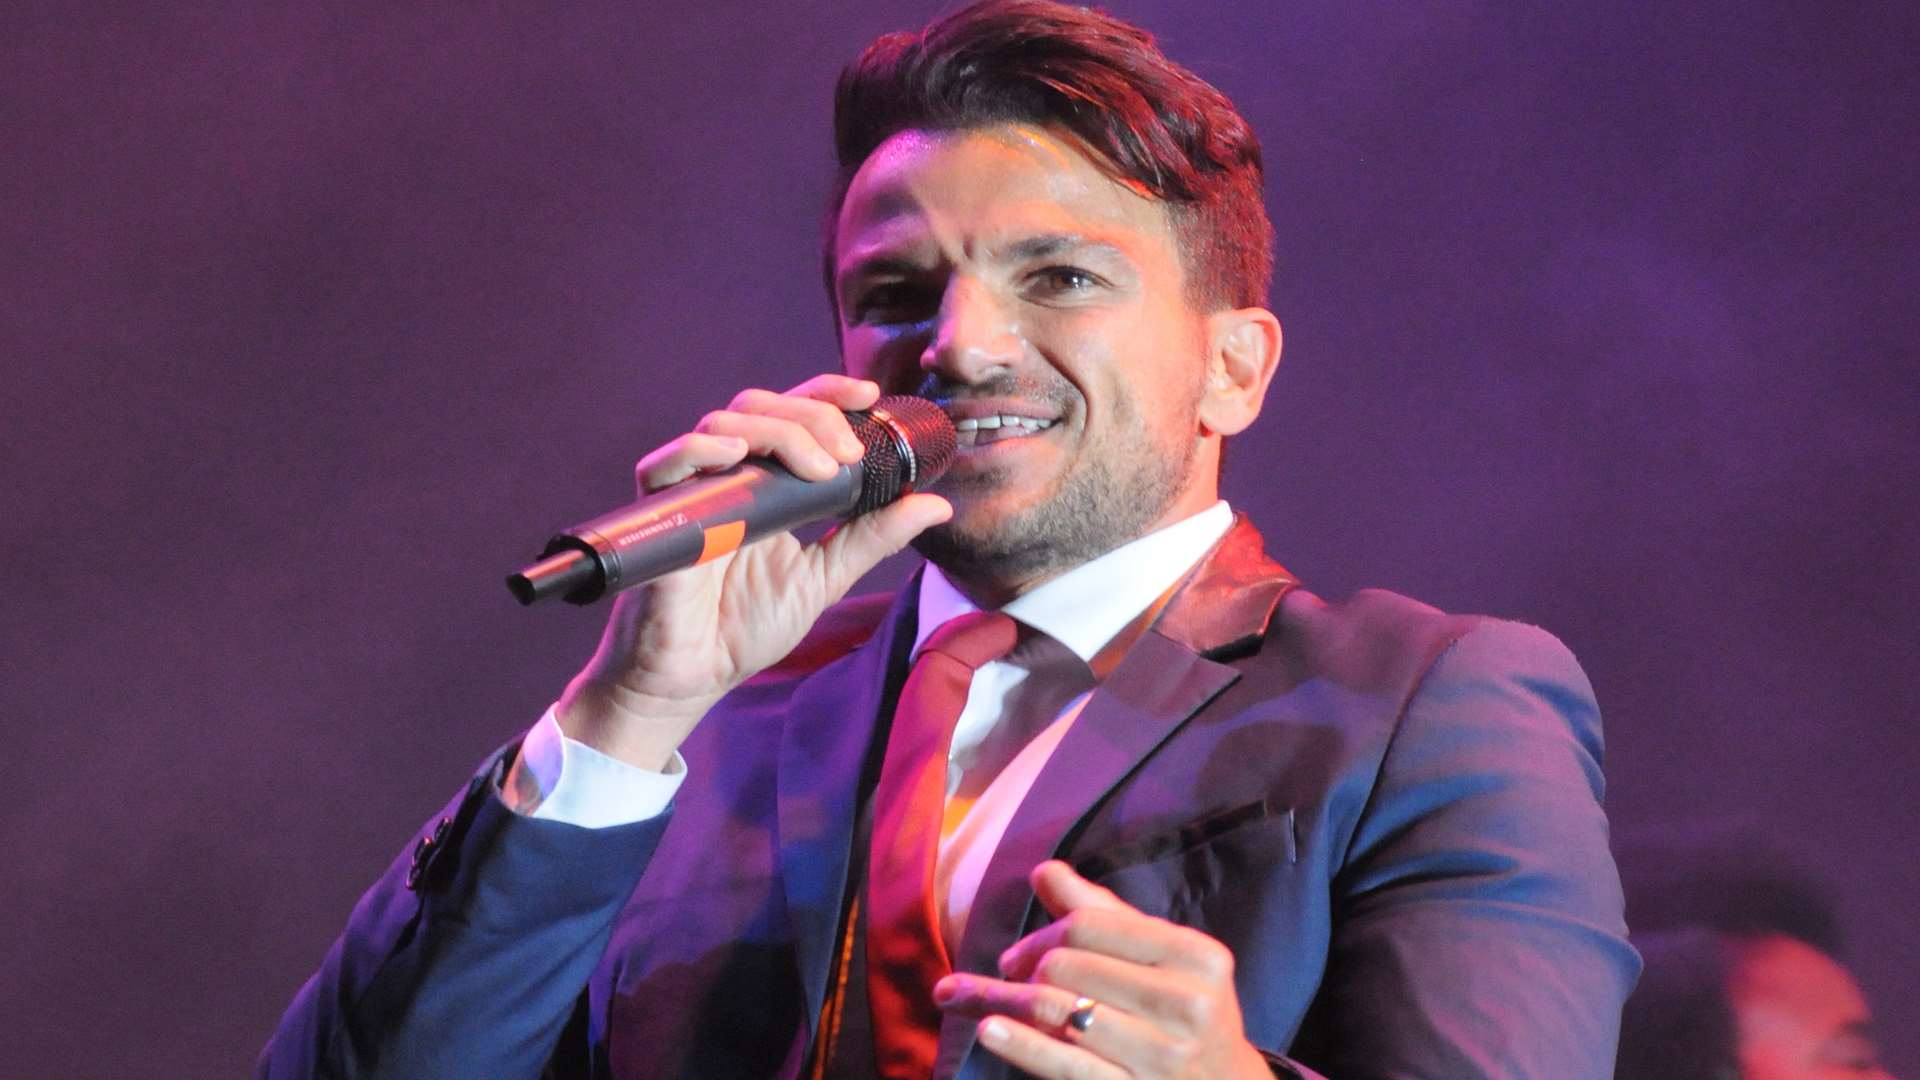 Peter Andre will be on kmfm on Friday